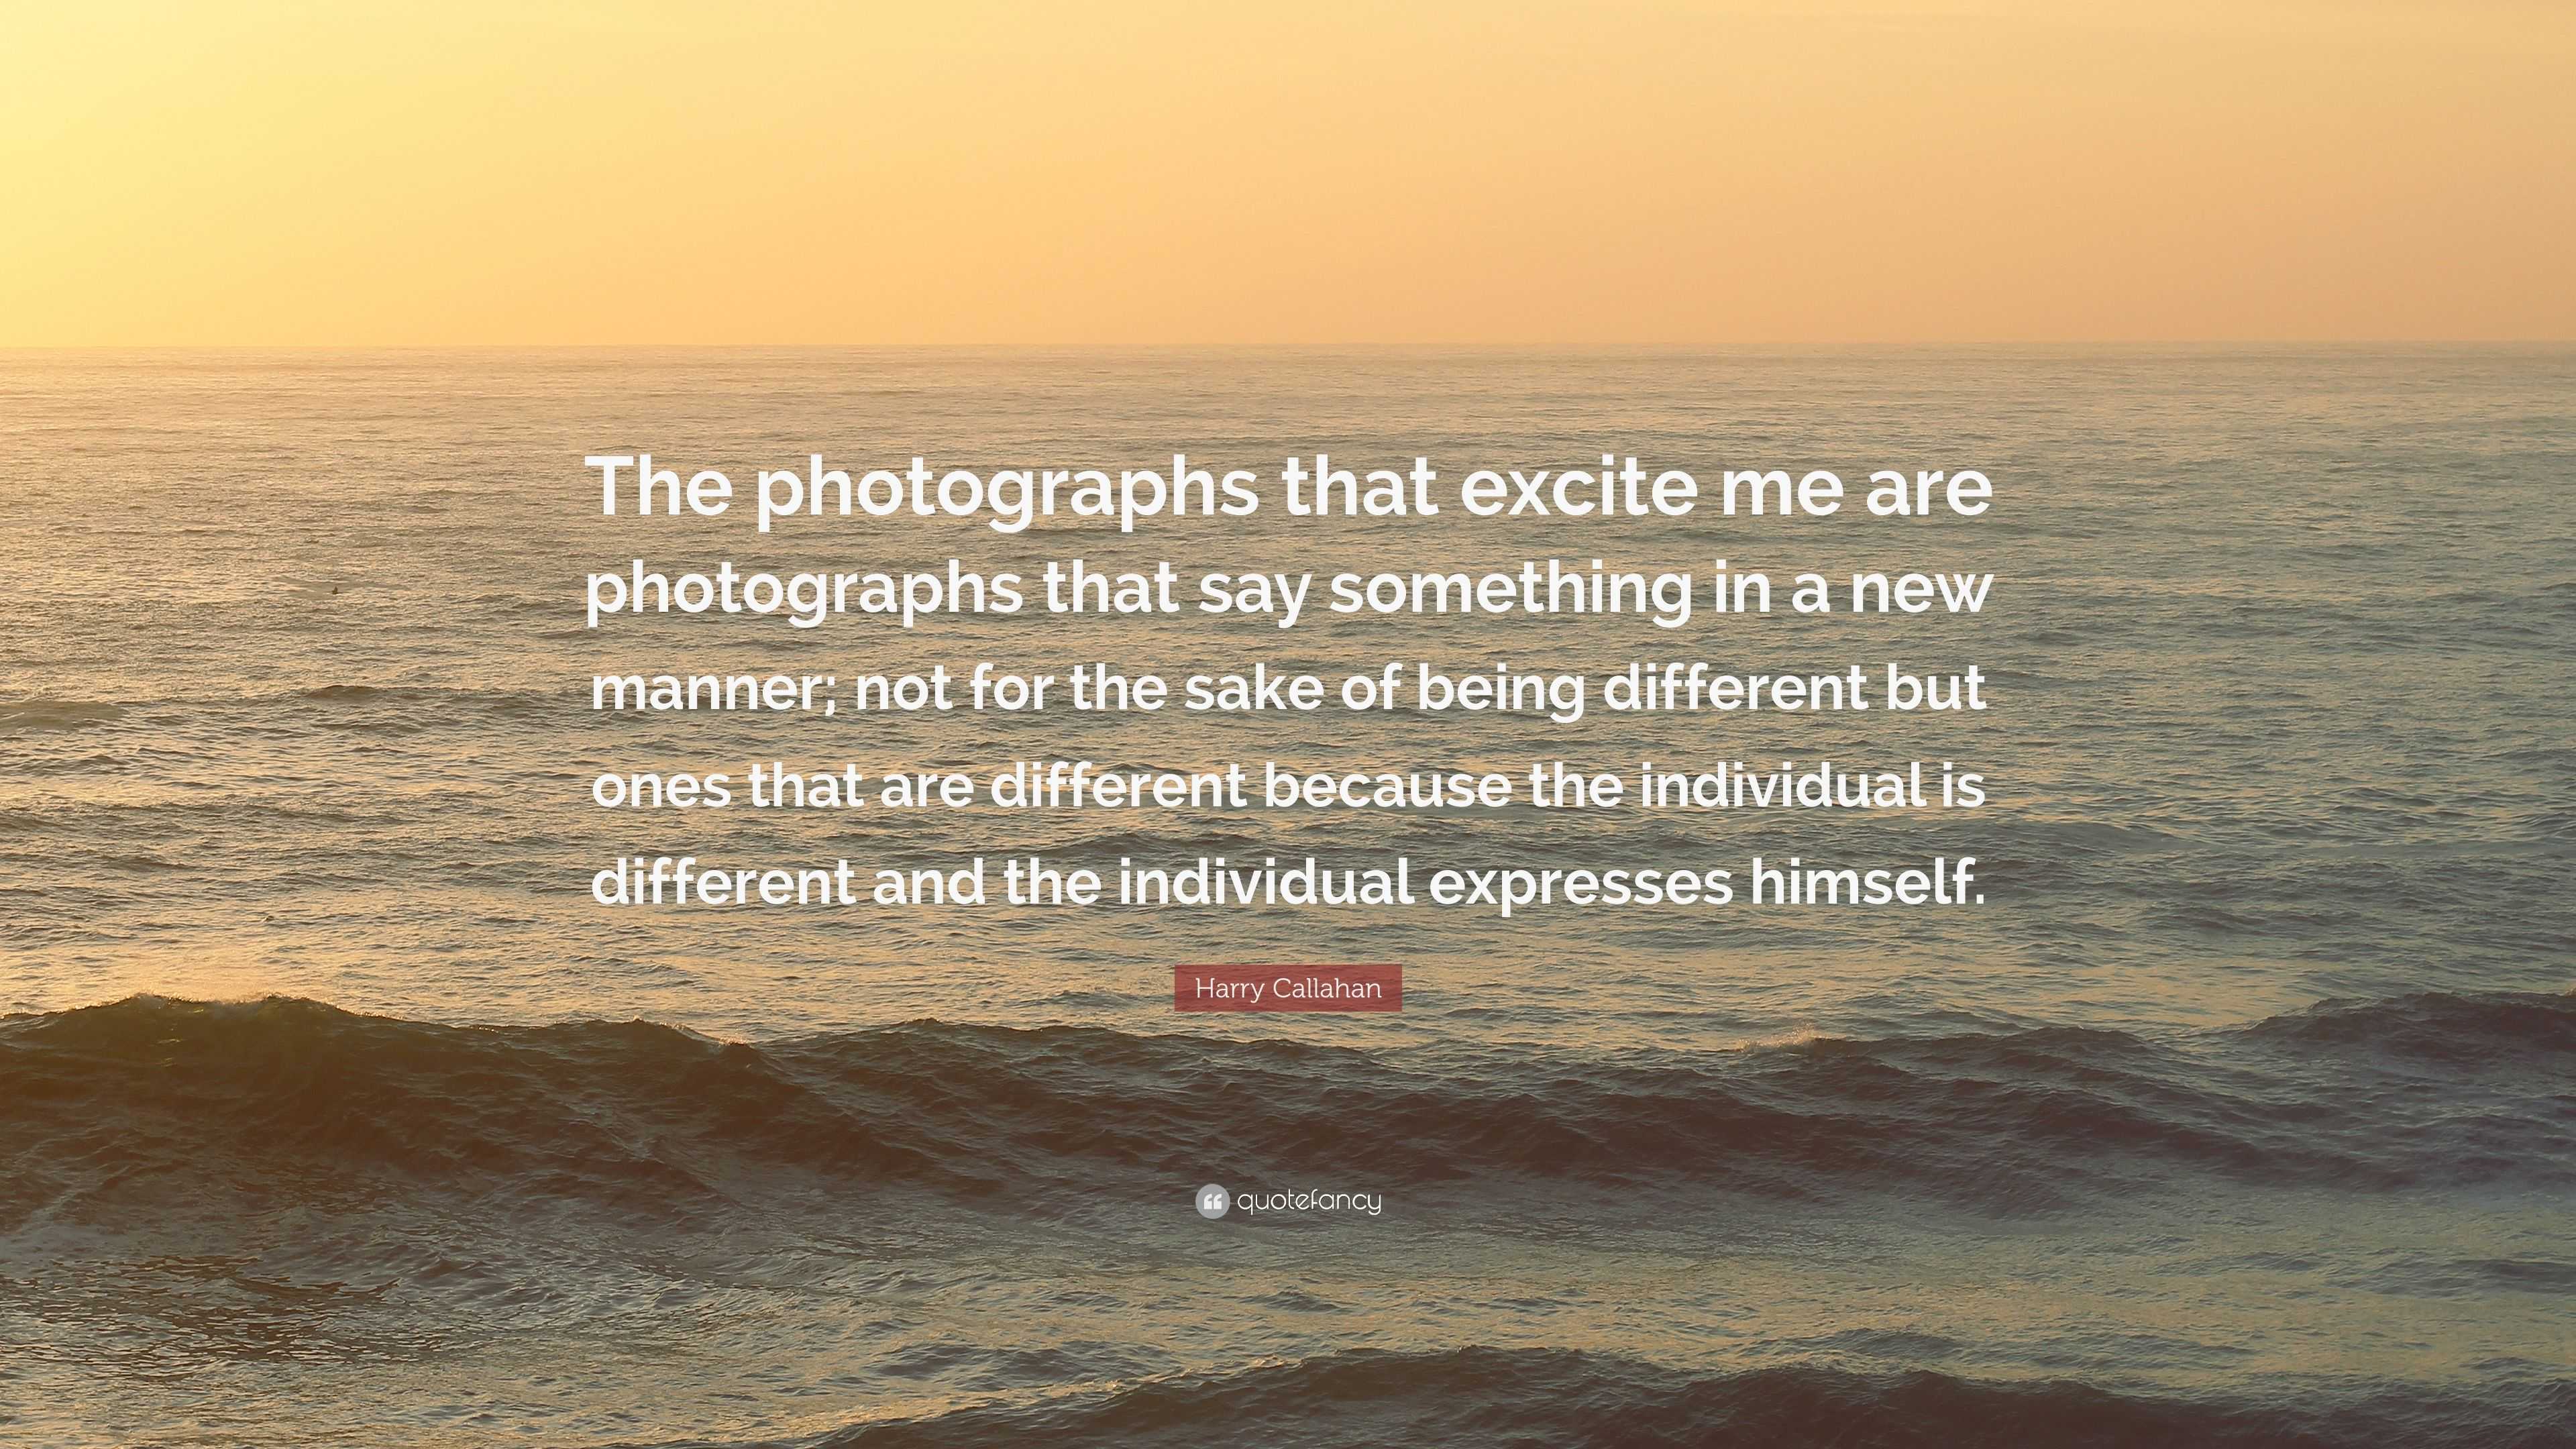 Harry Callahan Quote: “The photographs that excite me are photographs ...